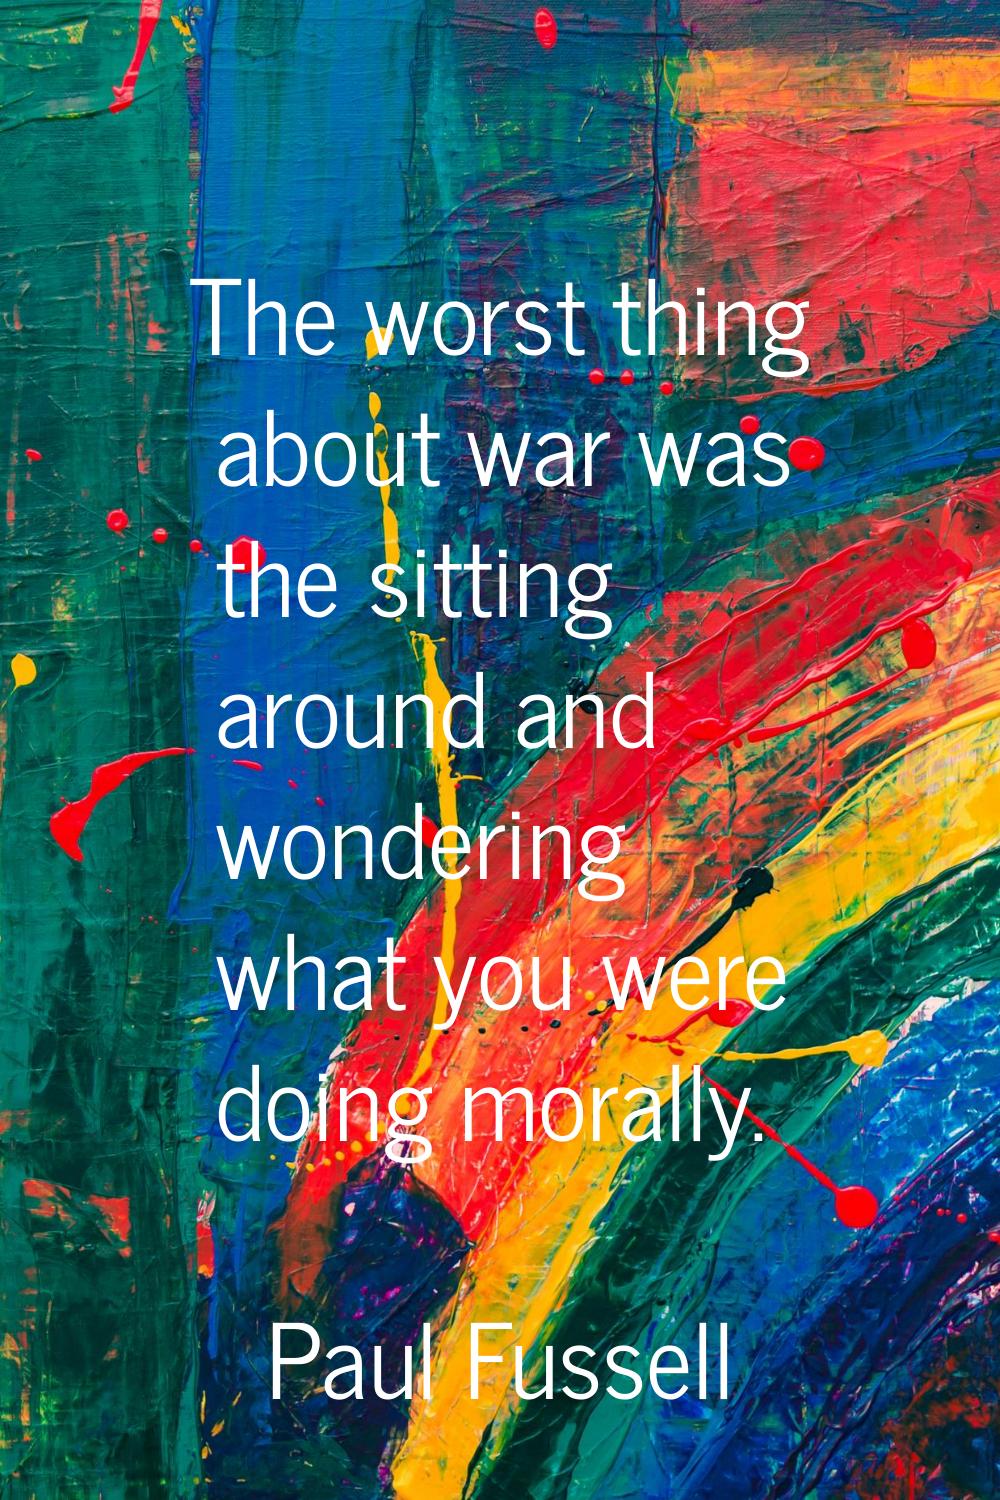 The worst thing about war was the sitting around and wondering what you were doing morally.